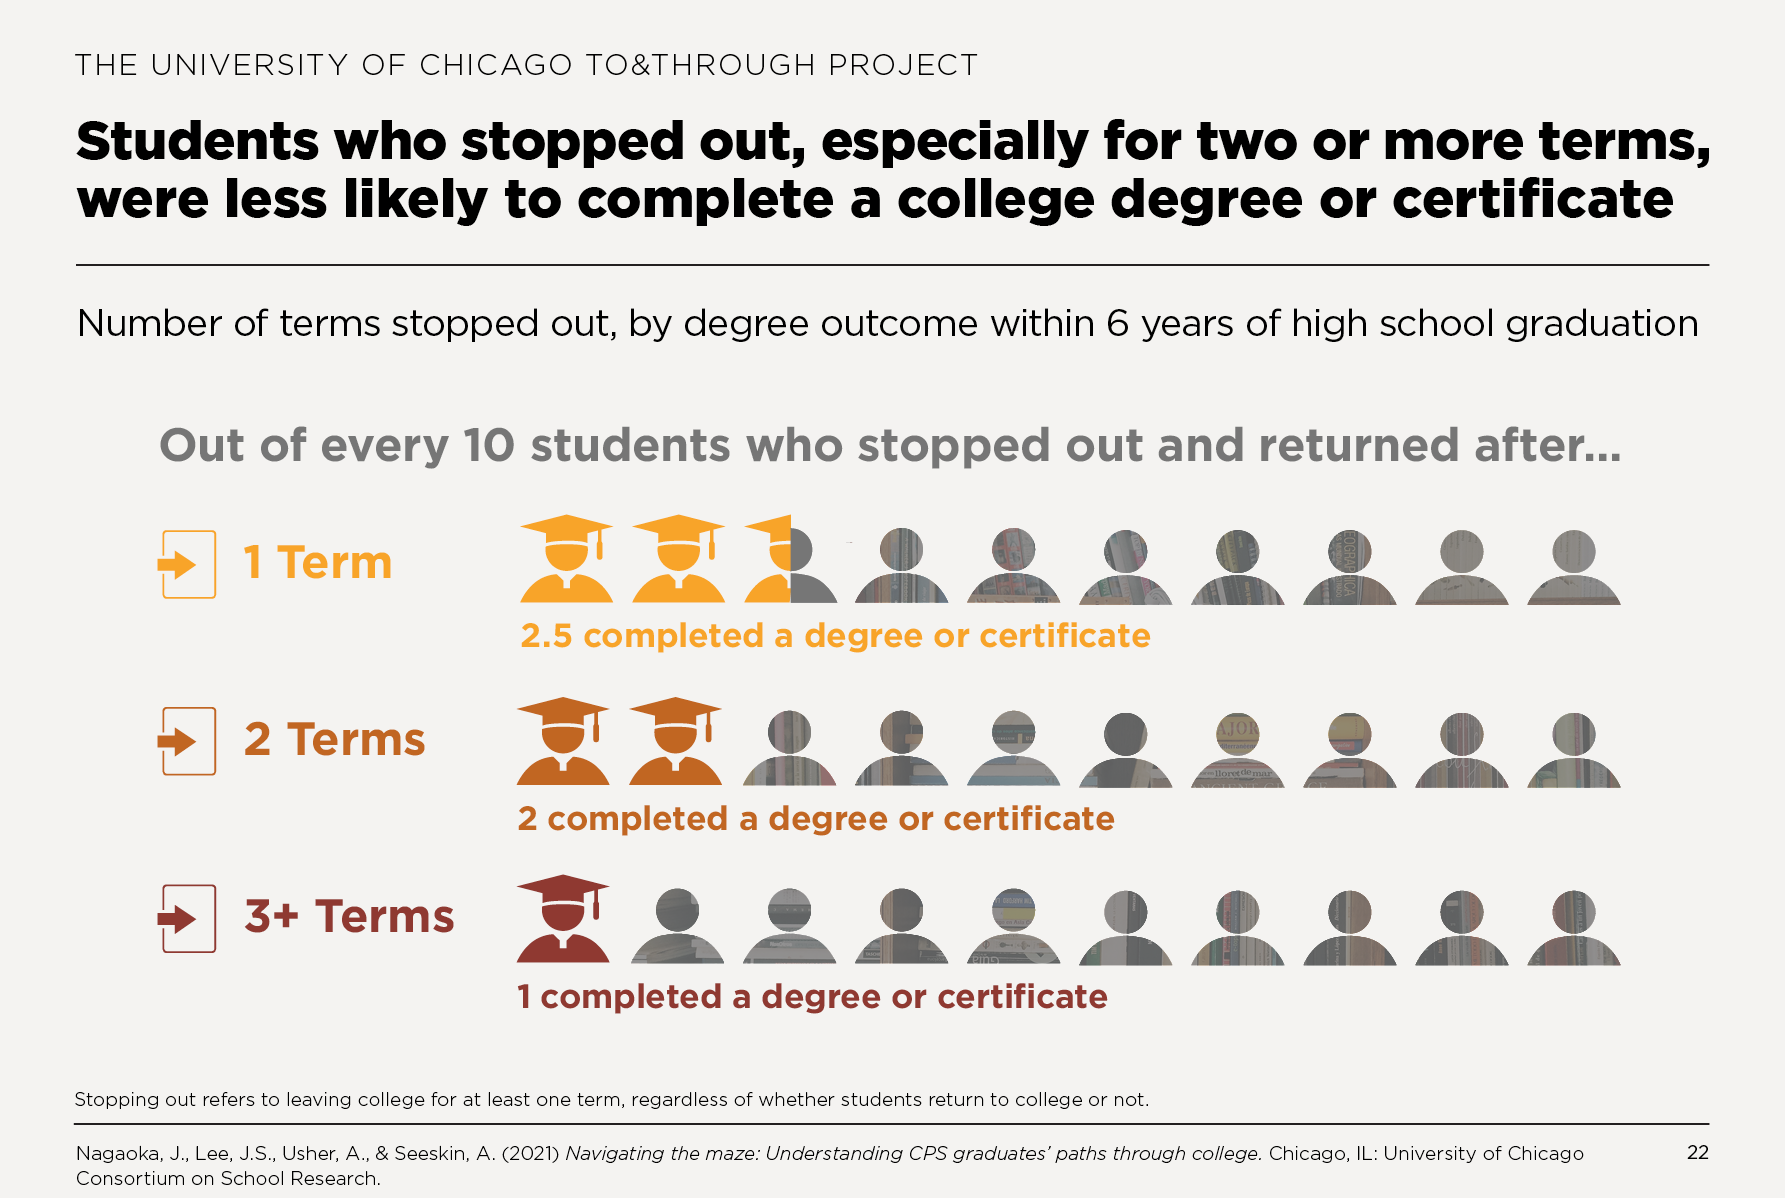 Students who stopped out, especially for two or more terms, were less likely to complete a college degree or certificate